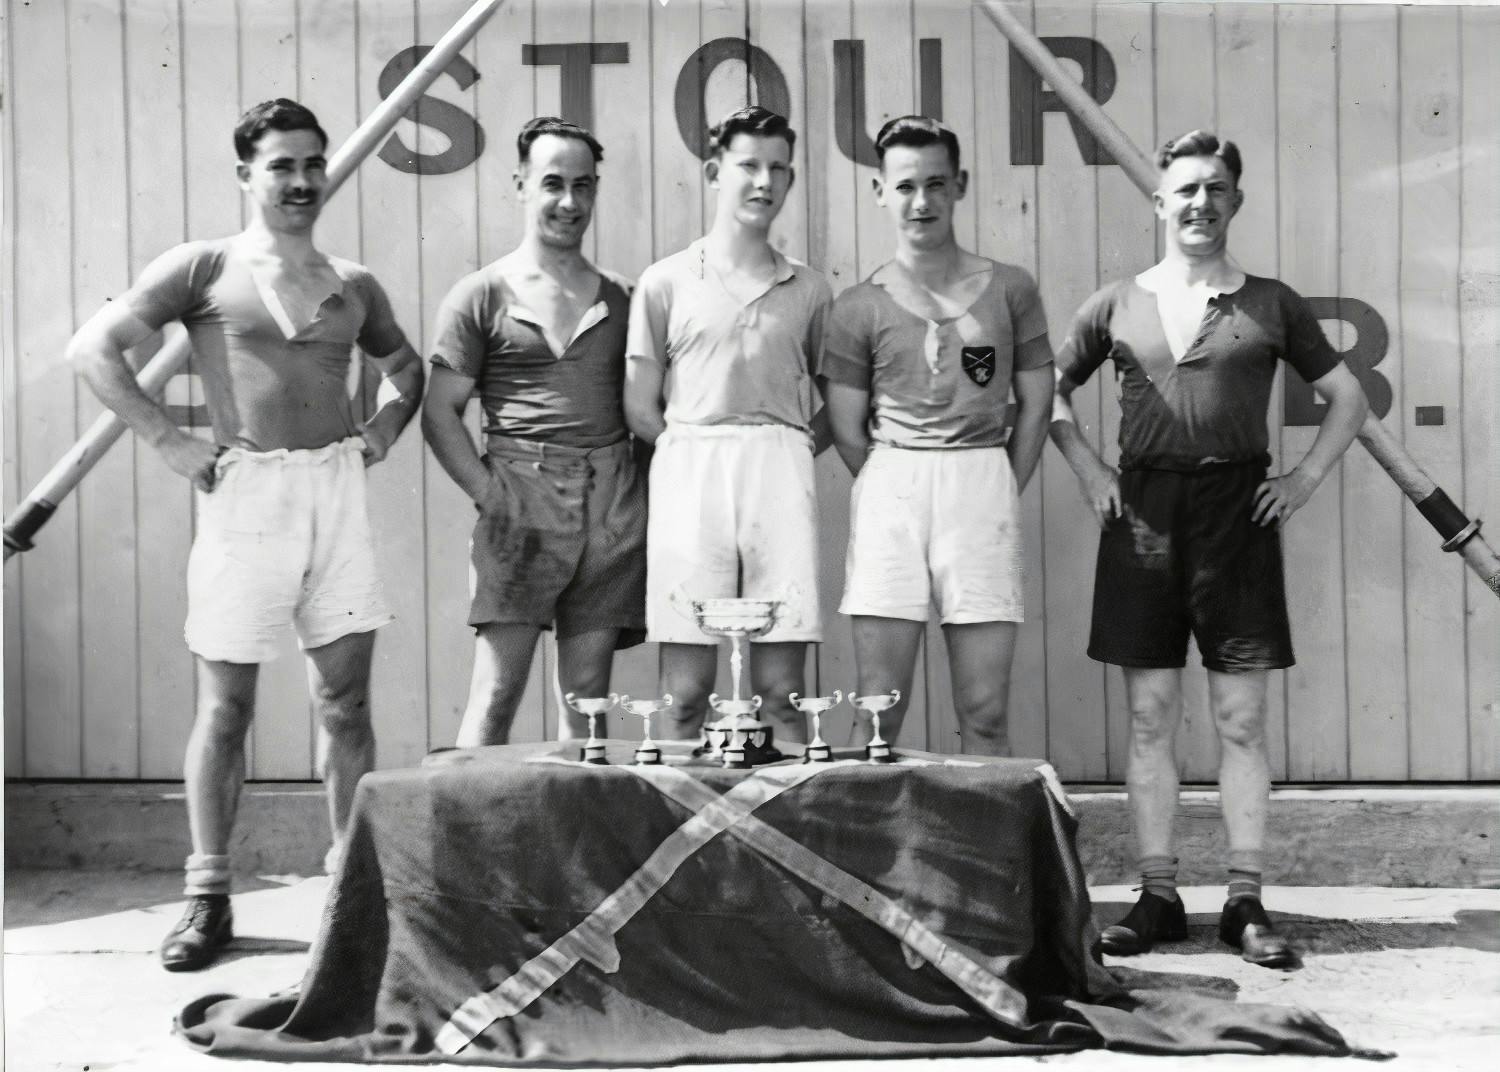 A victorious crew poses in front of the clubhouse doors, probably in the 1940s.